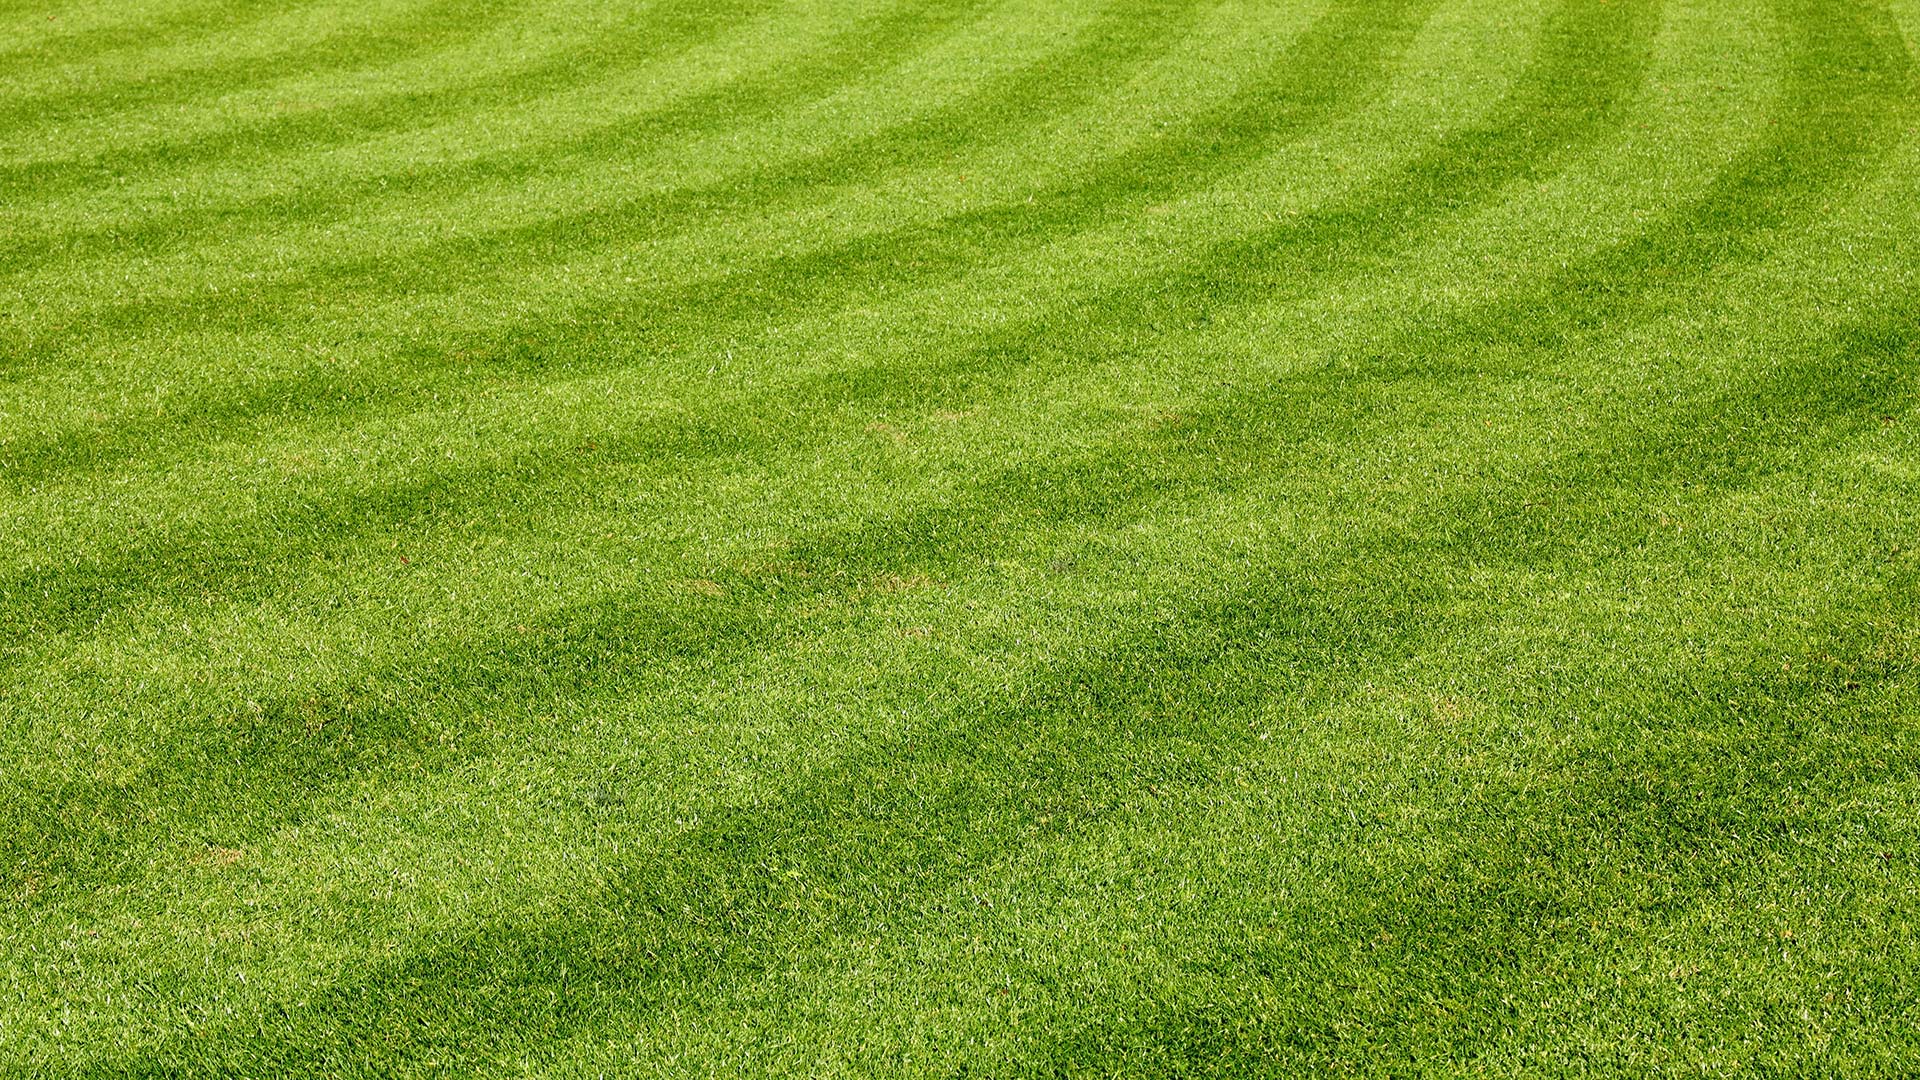 4 Common Lawn Care & Maintenance Mistakes to Avoid This Summer